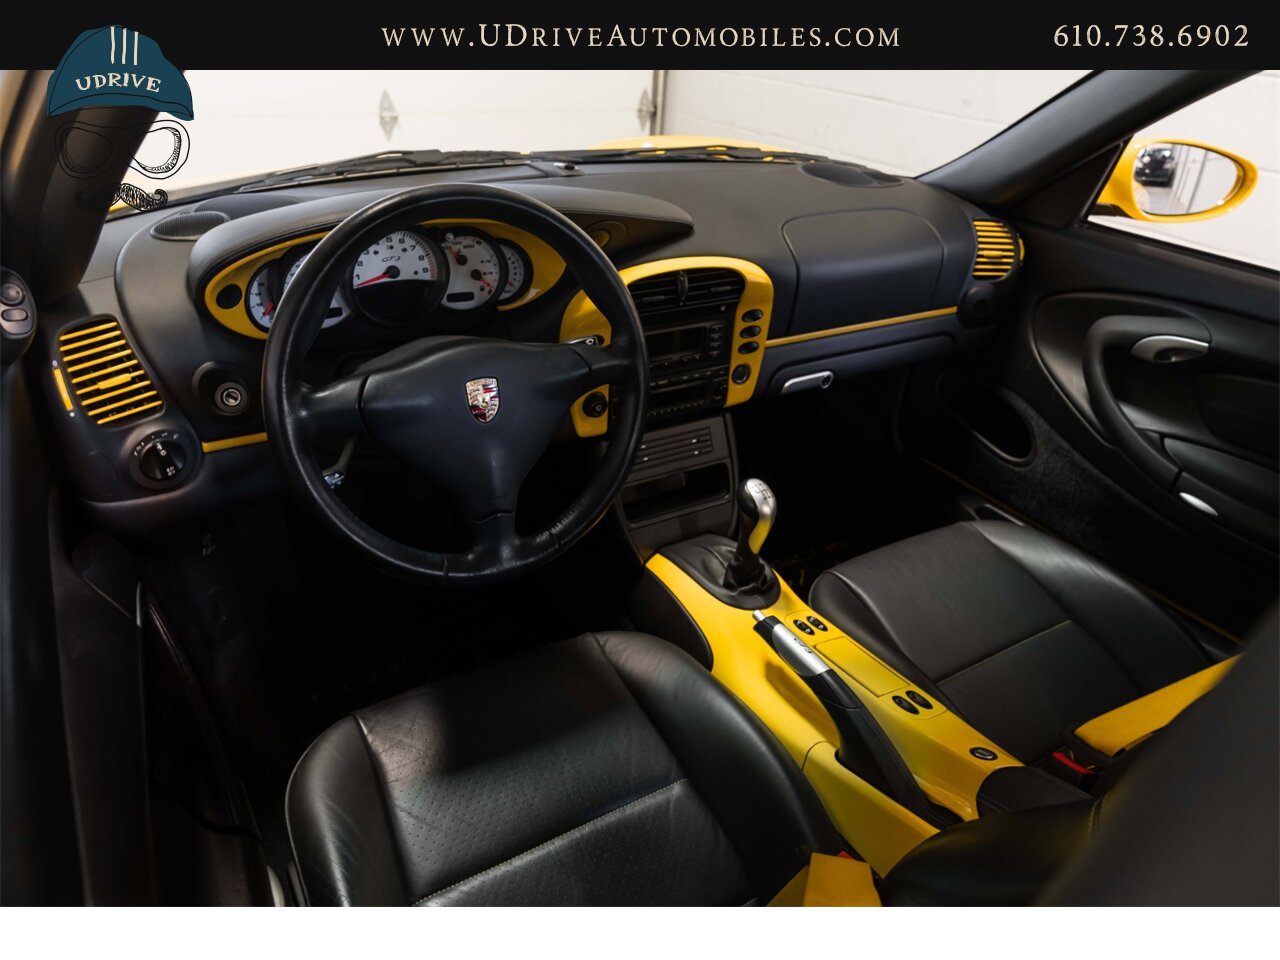 2005 Porsche 911 GT3 996 Speed Yellow Sport Seats Pntd Hardbacks  Pntd Console Deviating Stitch Yellow Accents Throughout - Photo 33 - West Chester, PA 19382